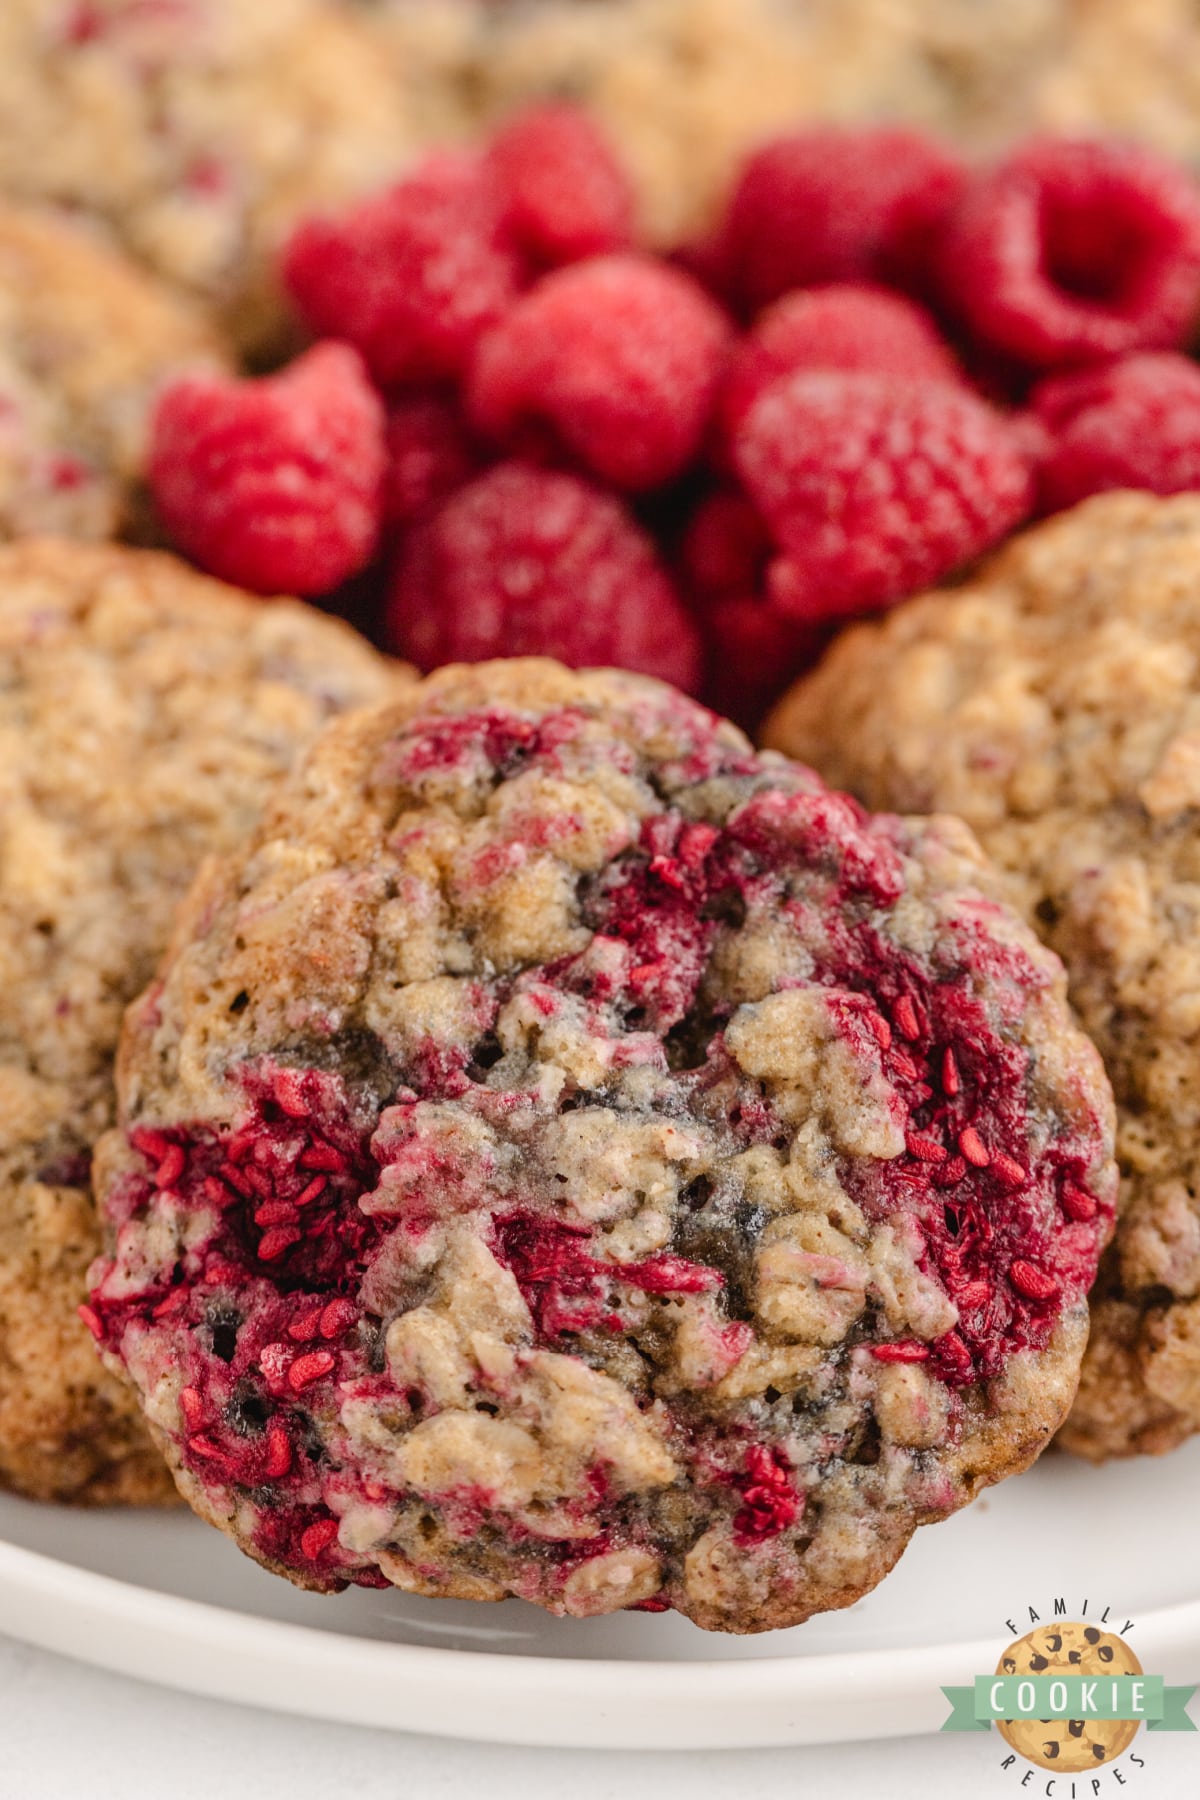 Raspberry Oatmeal Cookies are soft, chewy, and made with frozen raspberries. Amazing oatmeal cookie recipe with a delicious twist! 